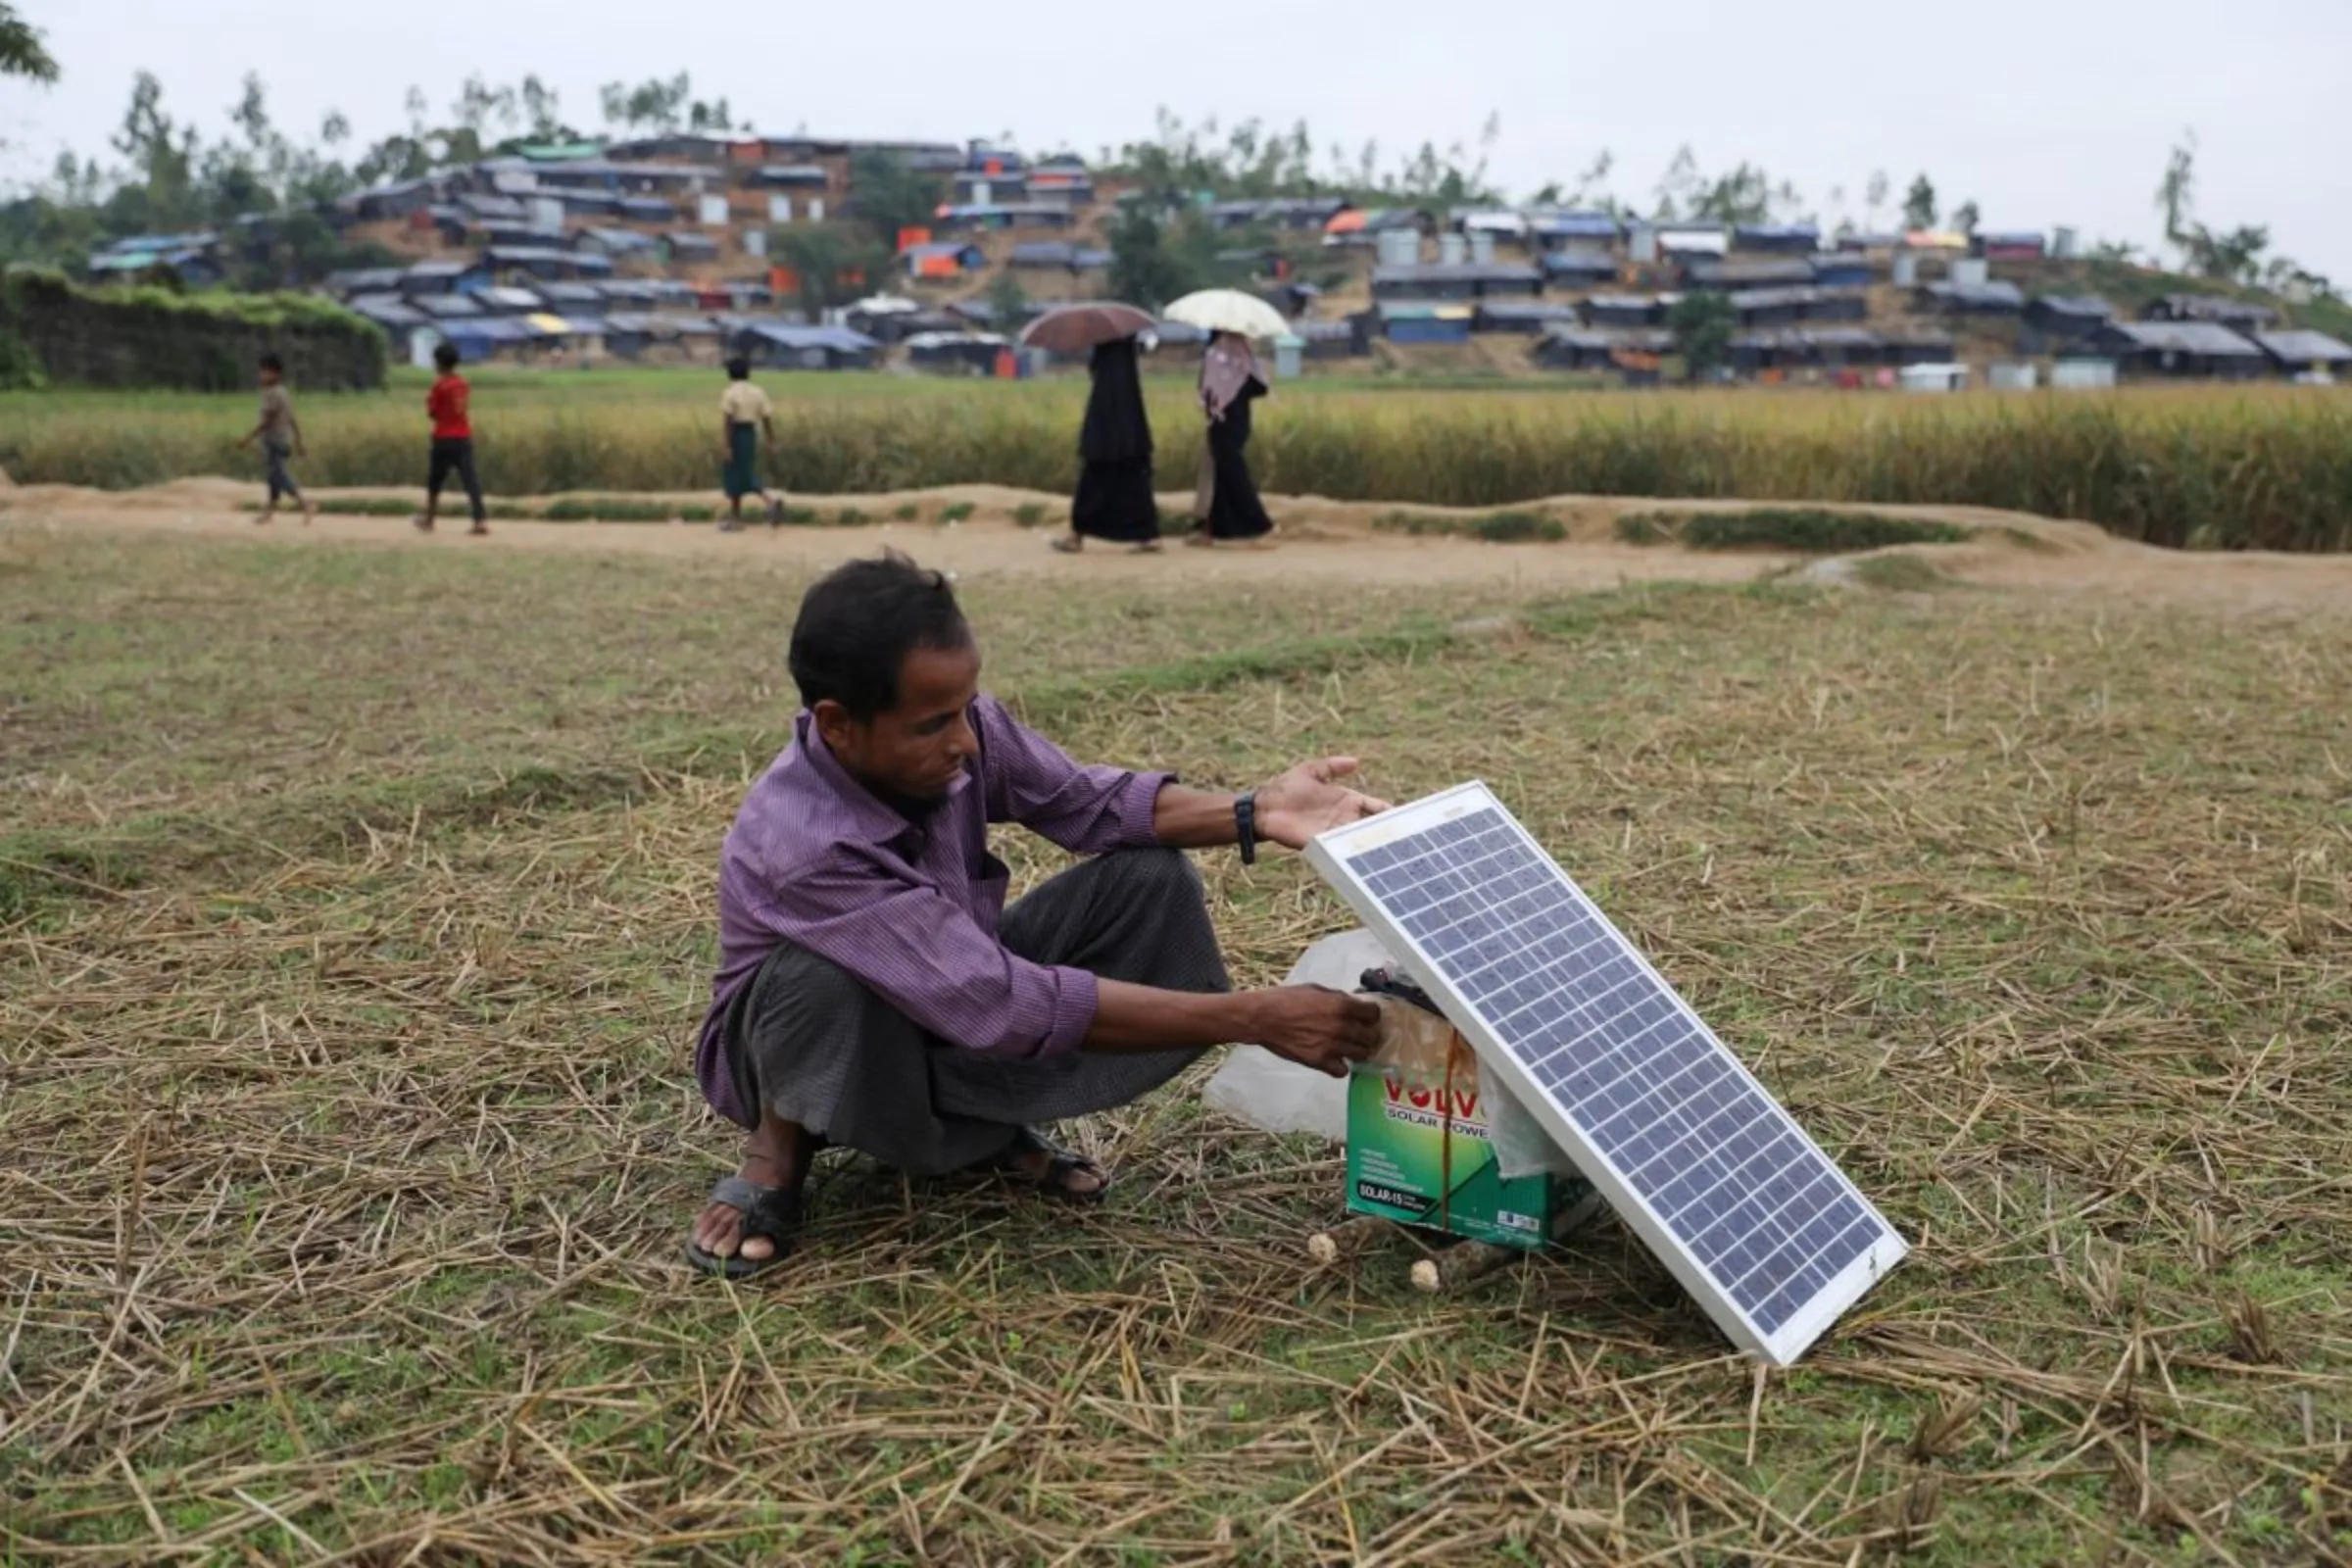 A Rohingya refugee man charges his mobile phone from a solar panel in the Palong Khali refugee camp in Cox's Bazar, Bangladesh, November 17, 2017